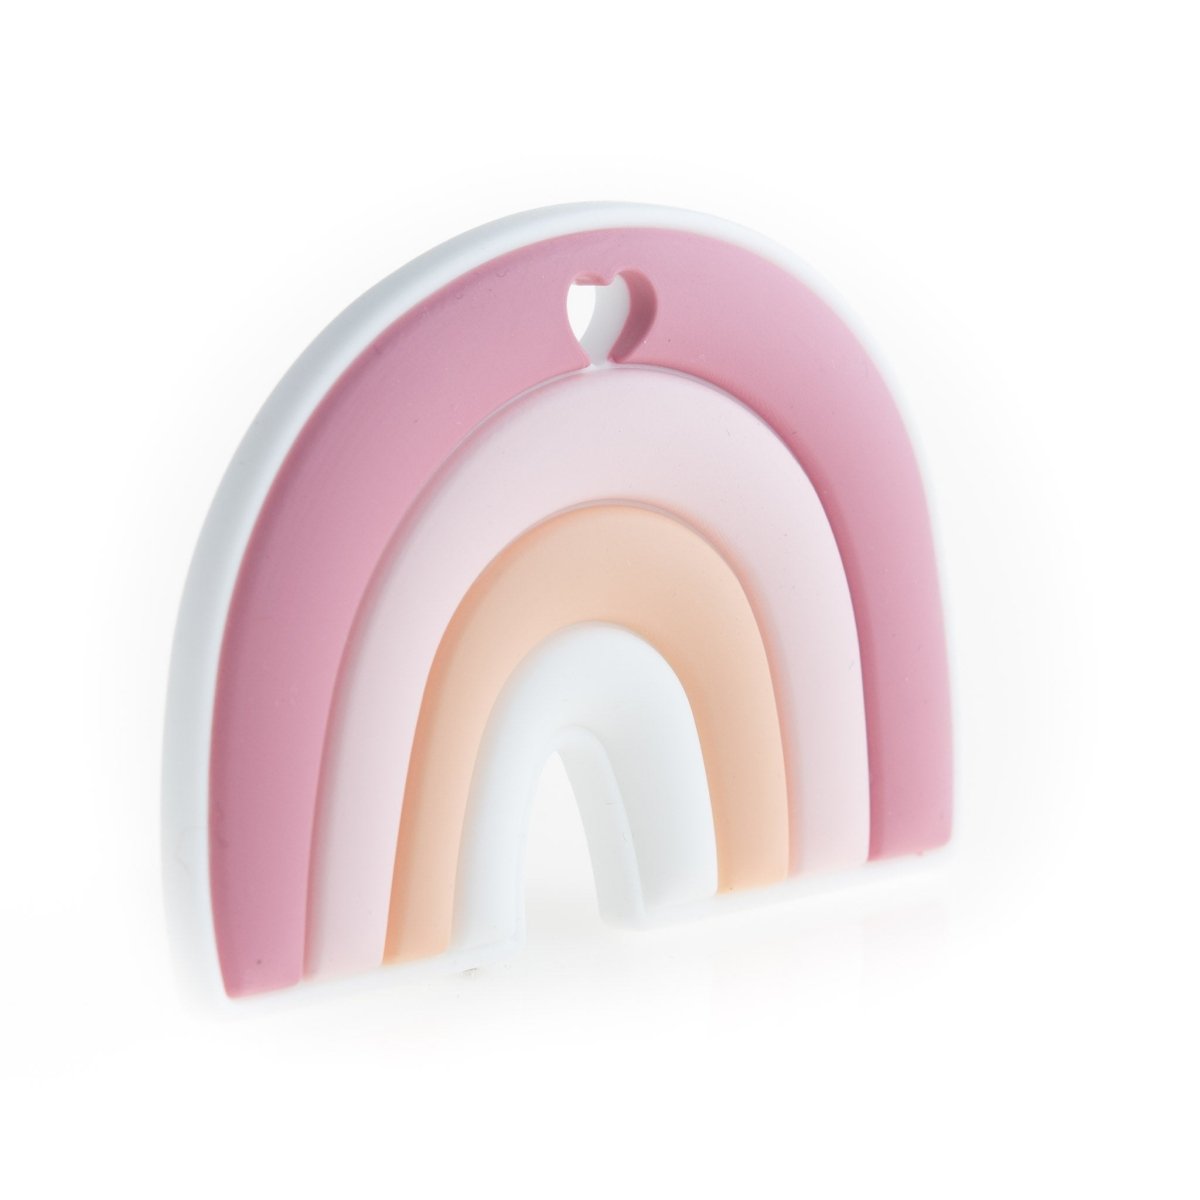 Silicone Teethers and Pendants Colorful Rainbows Dusk *updated design* from Cara & Co Craft Supply